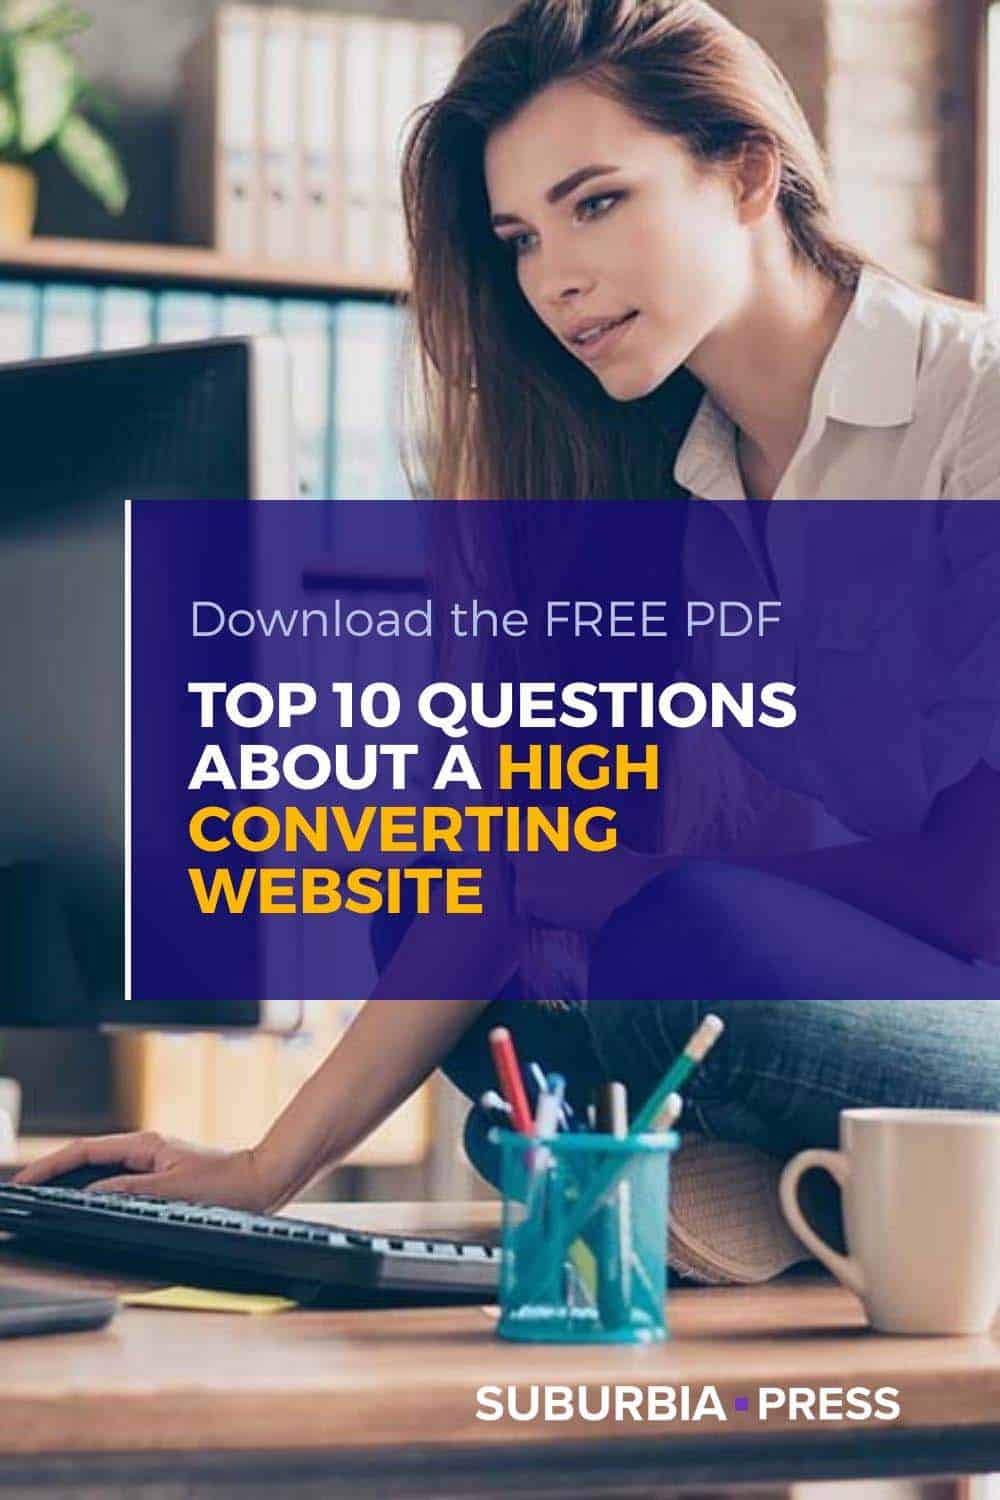 Top 10 Questions About a High Converting Website